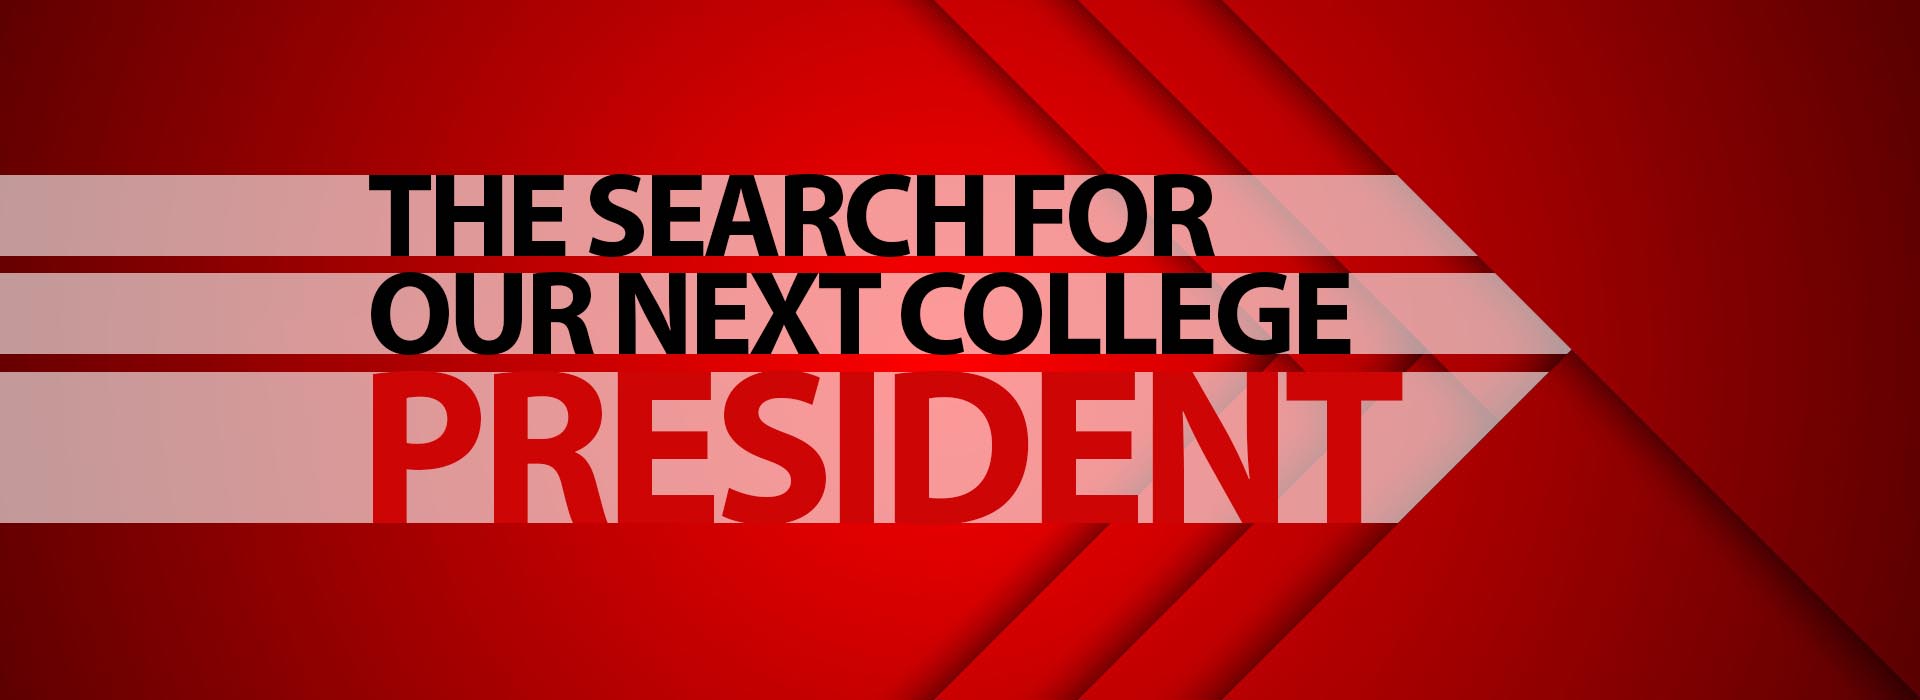 The search for our next college President